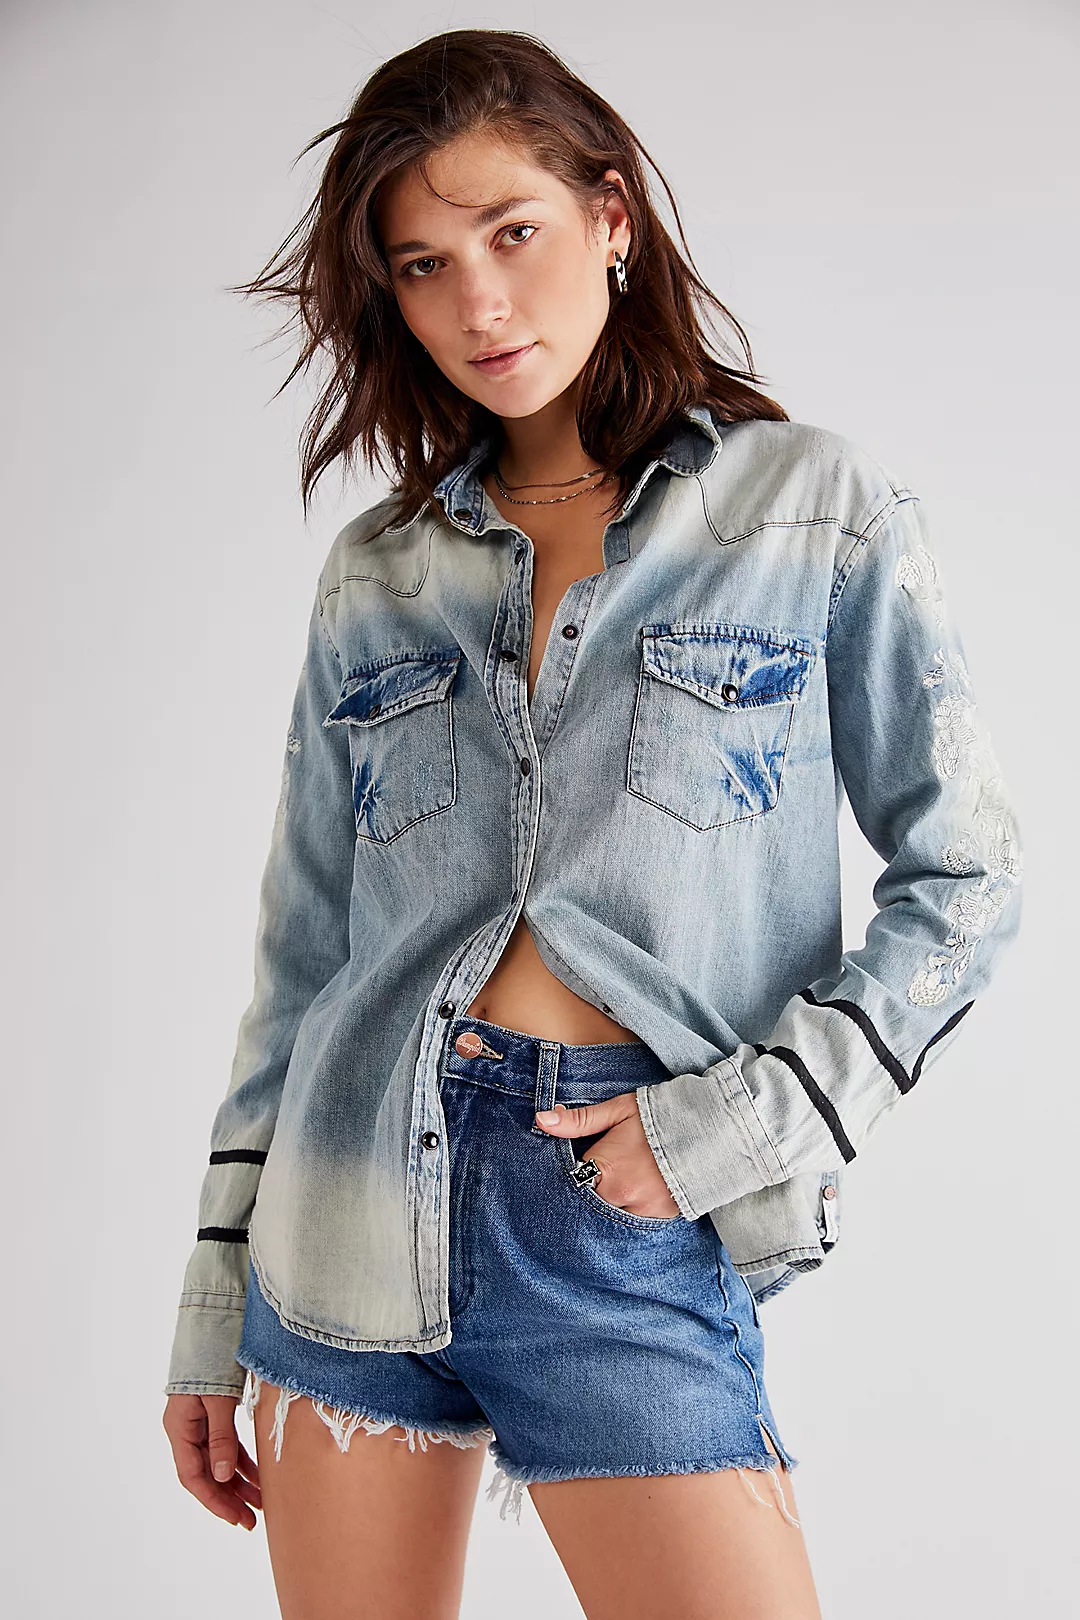 Freepeople Wolfgang Embroidered Western Shirt